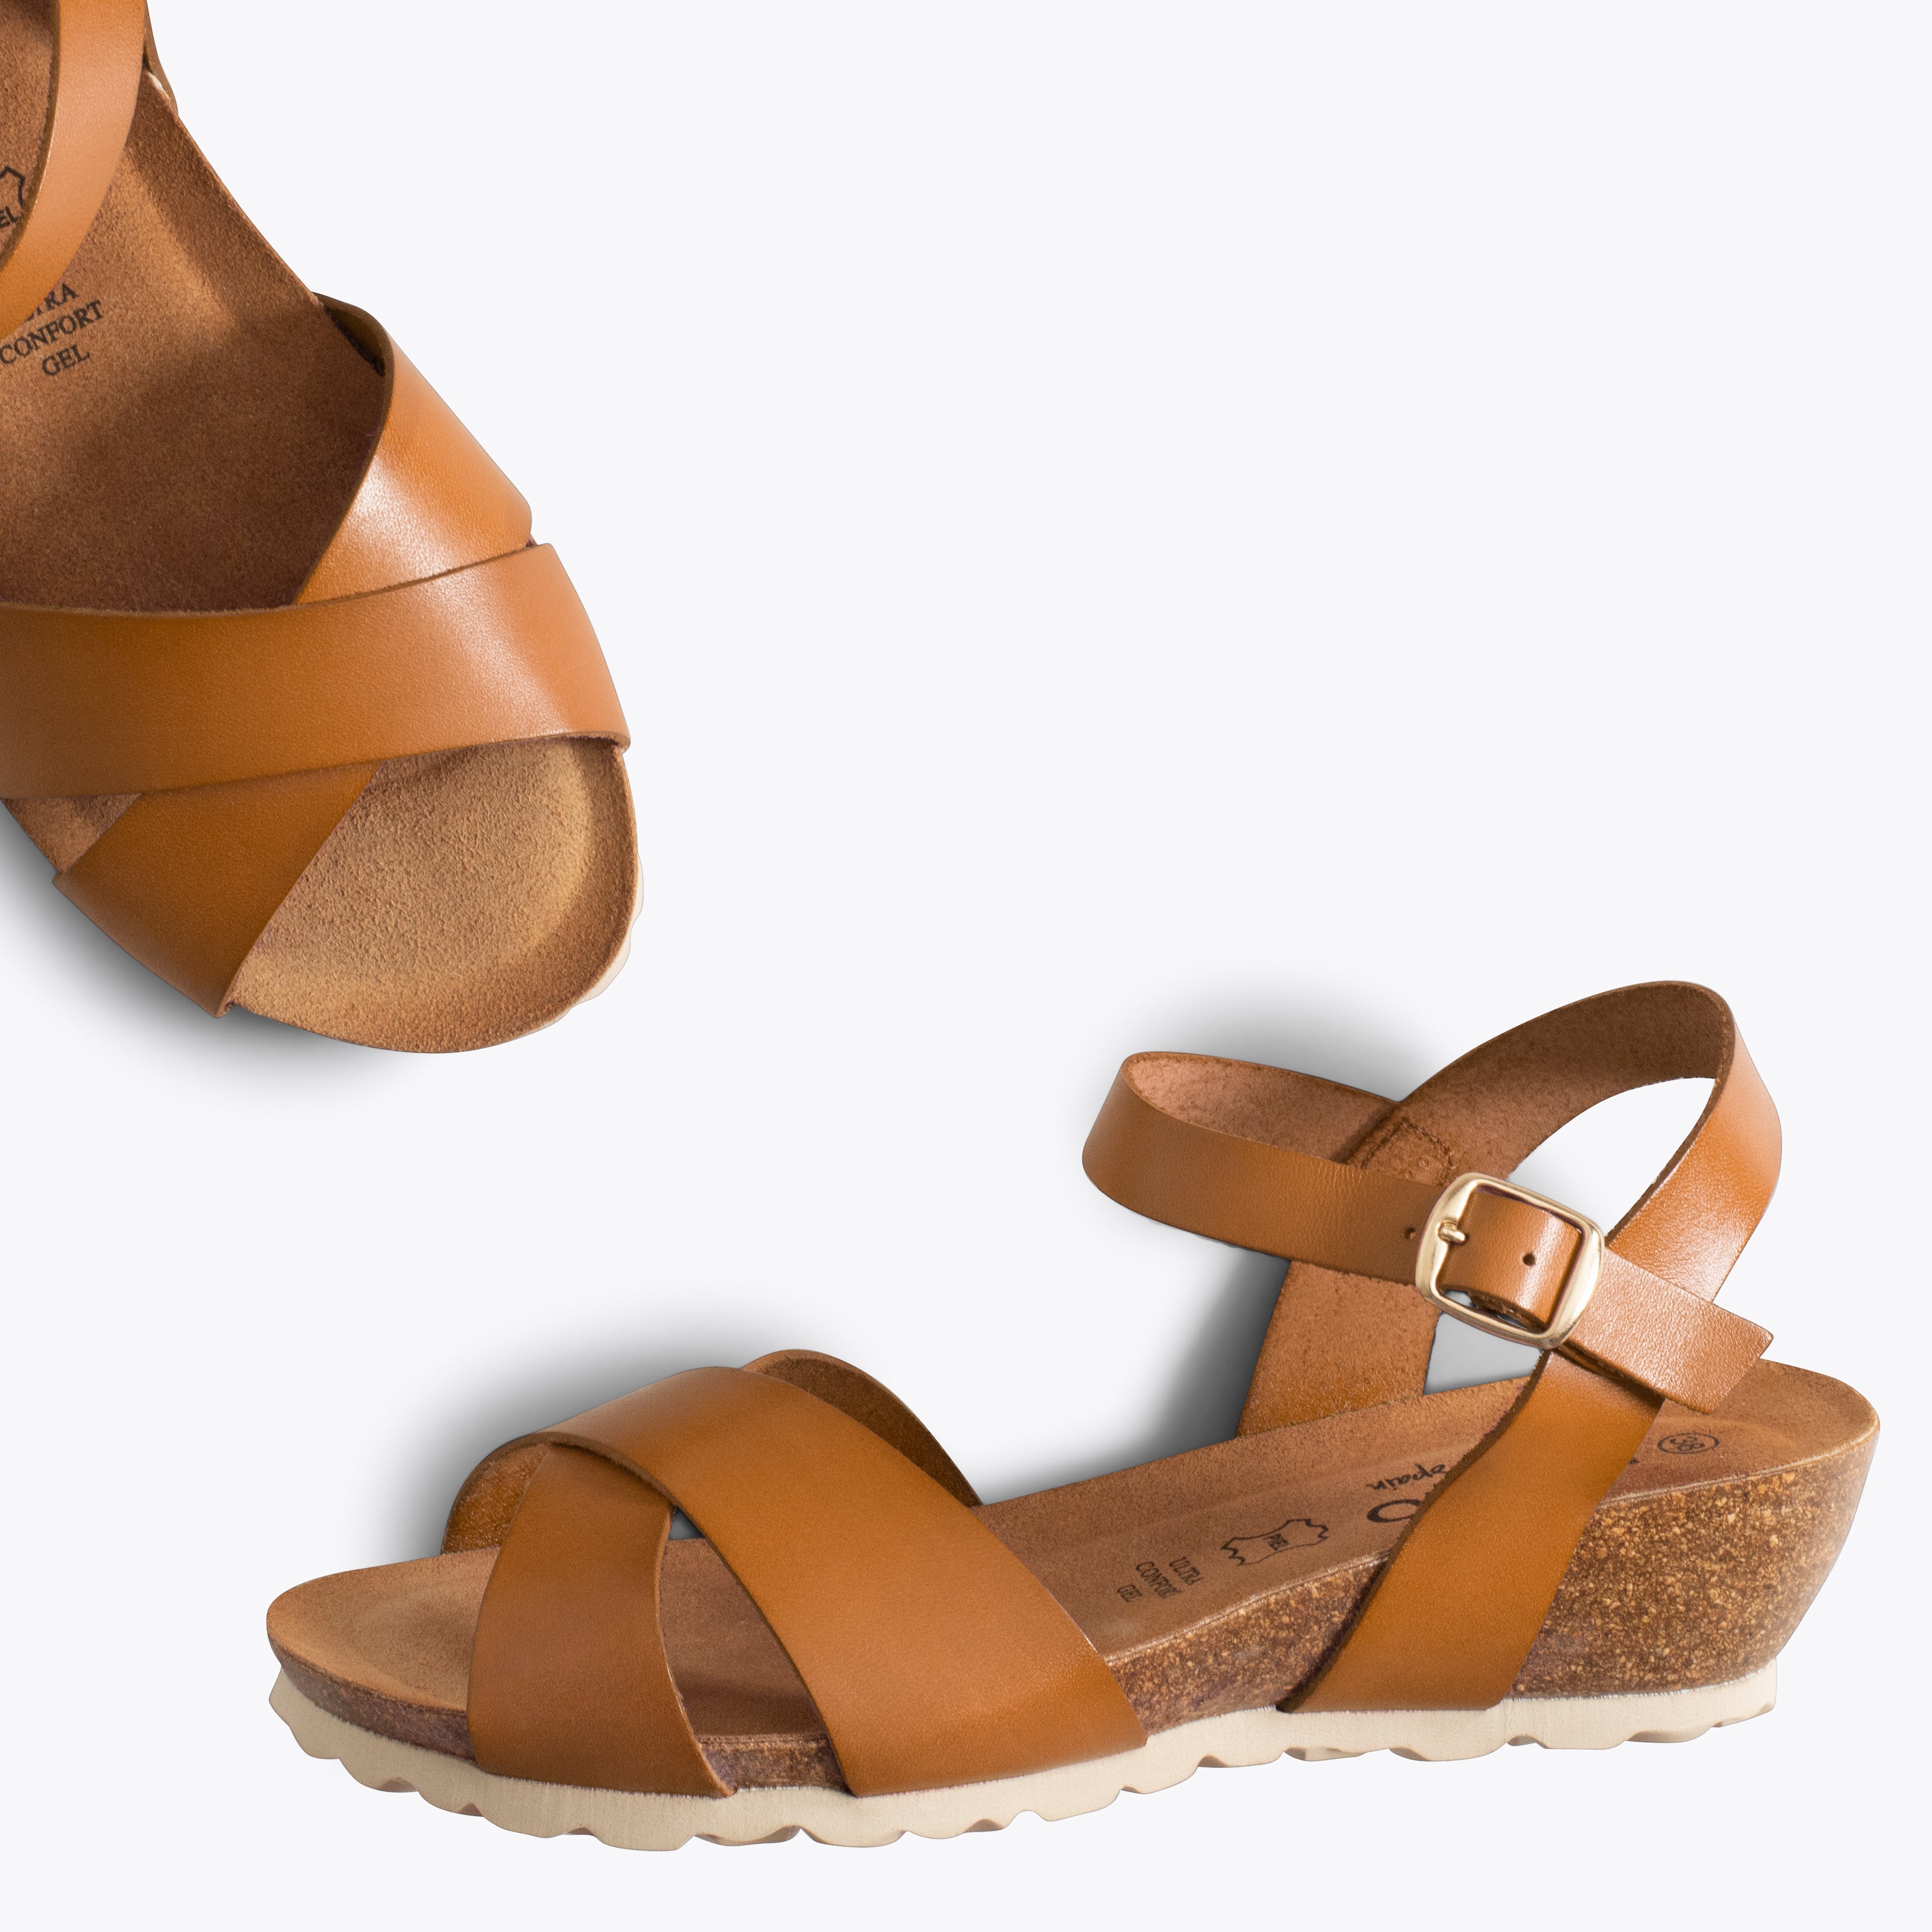 LOTO – CAMEL wedge sandals with BIO sole